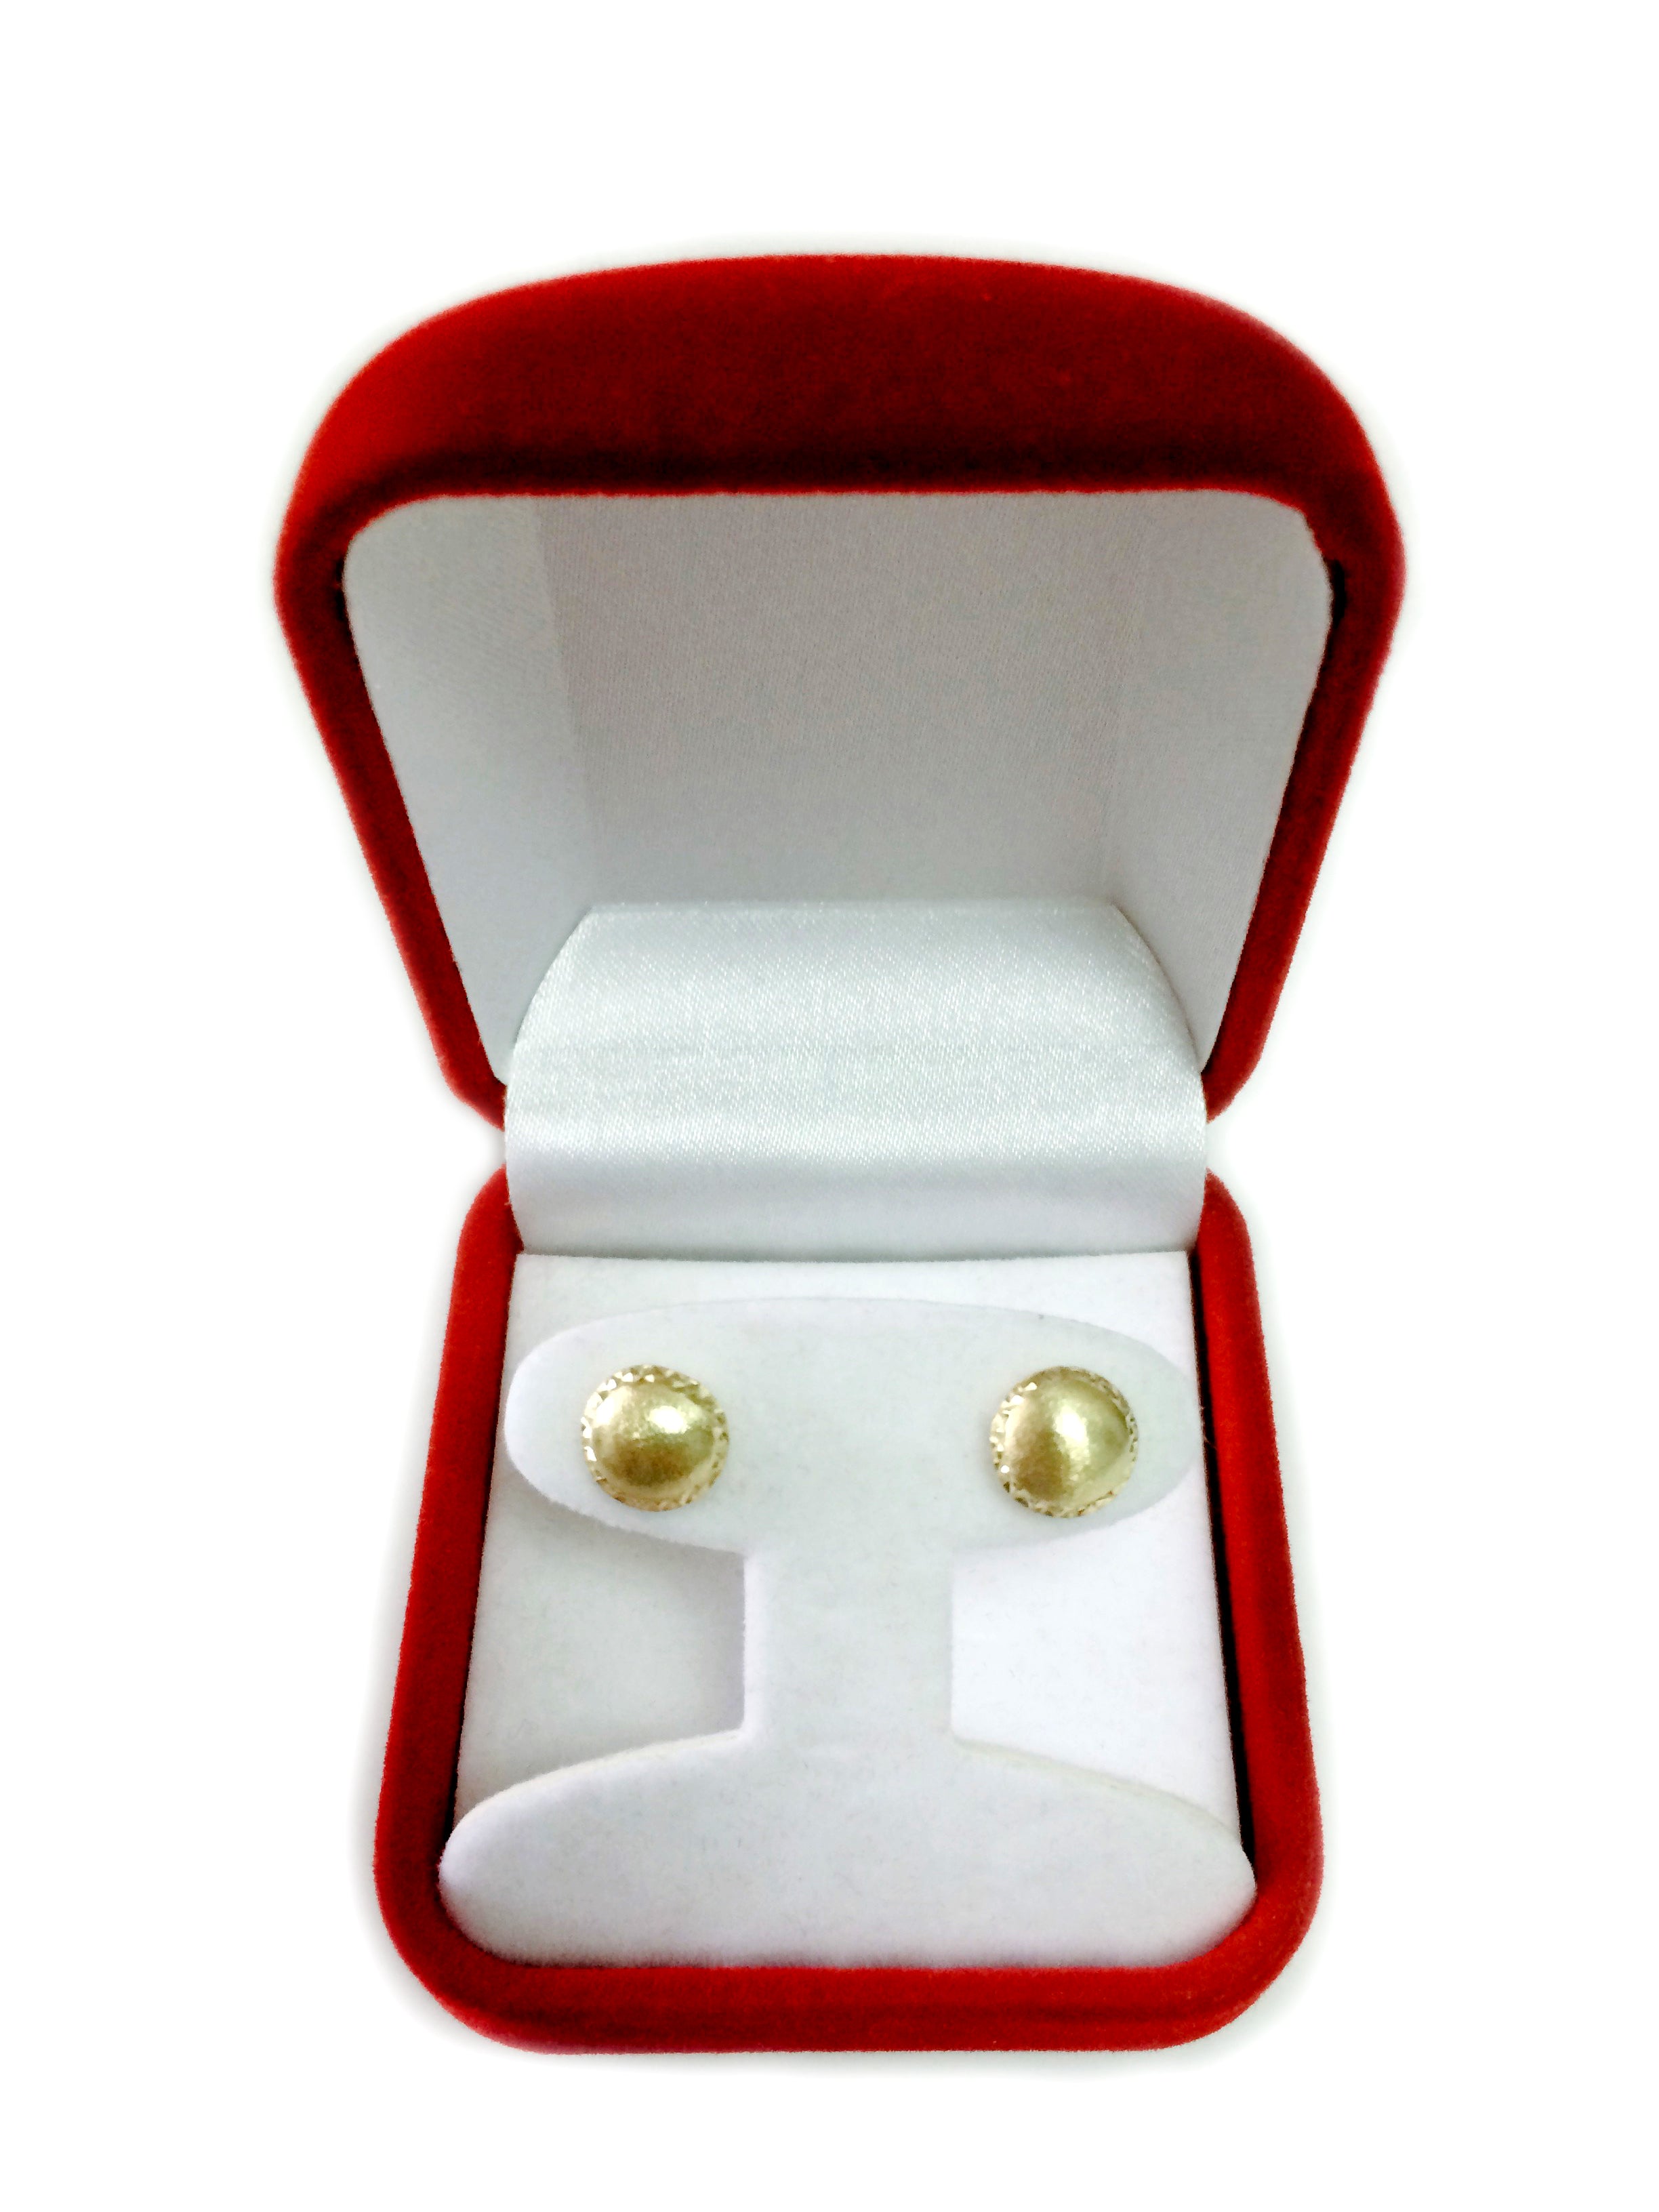 14k Yellow Gold Satin With Diamond Cut Edges Stud Earrings, 8mm fine designer jewelry for men and women